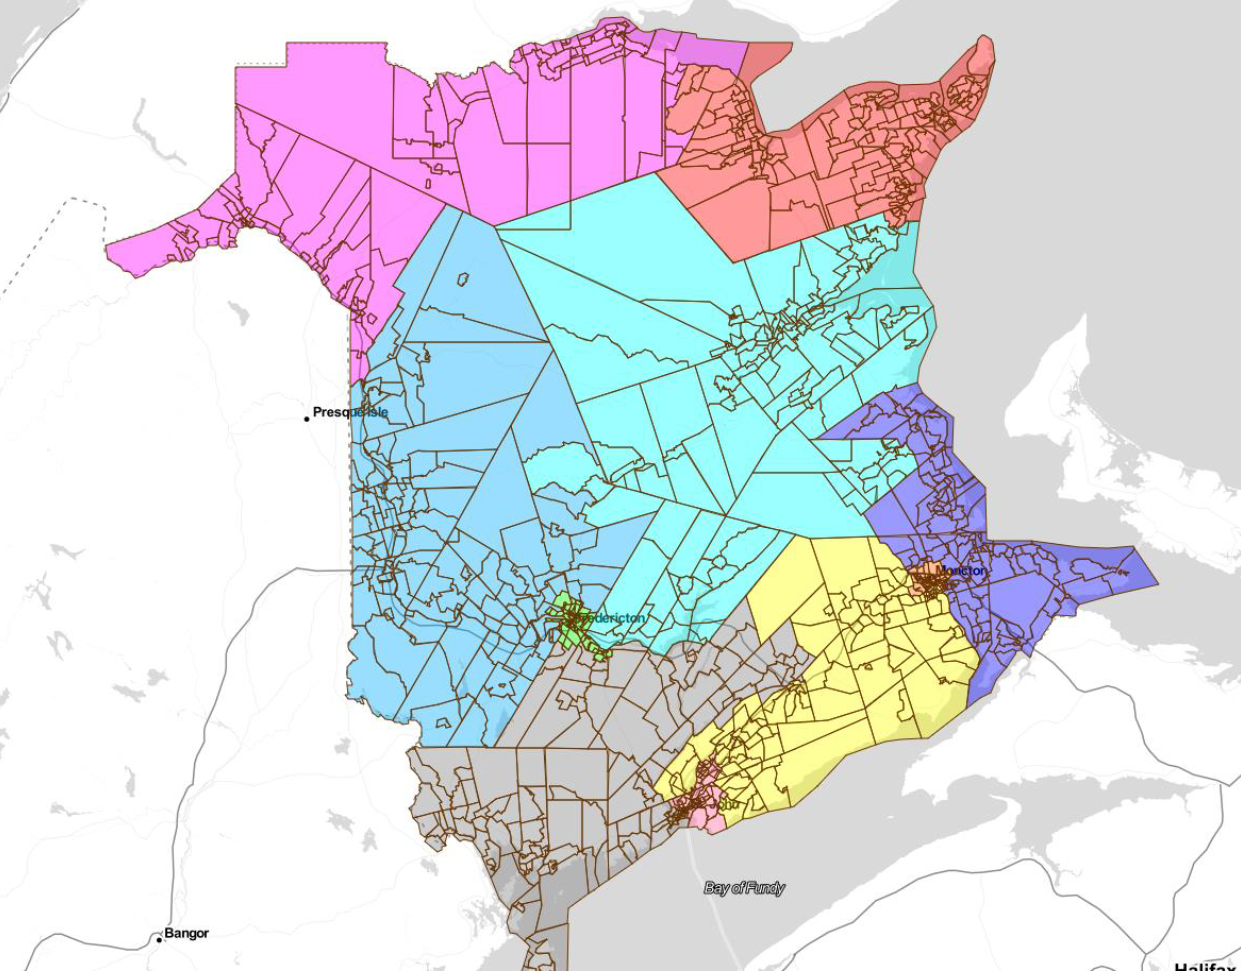 This image shows a proposed map of New Brunswick's electoral districts.